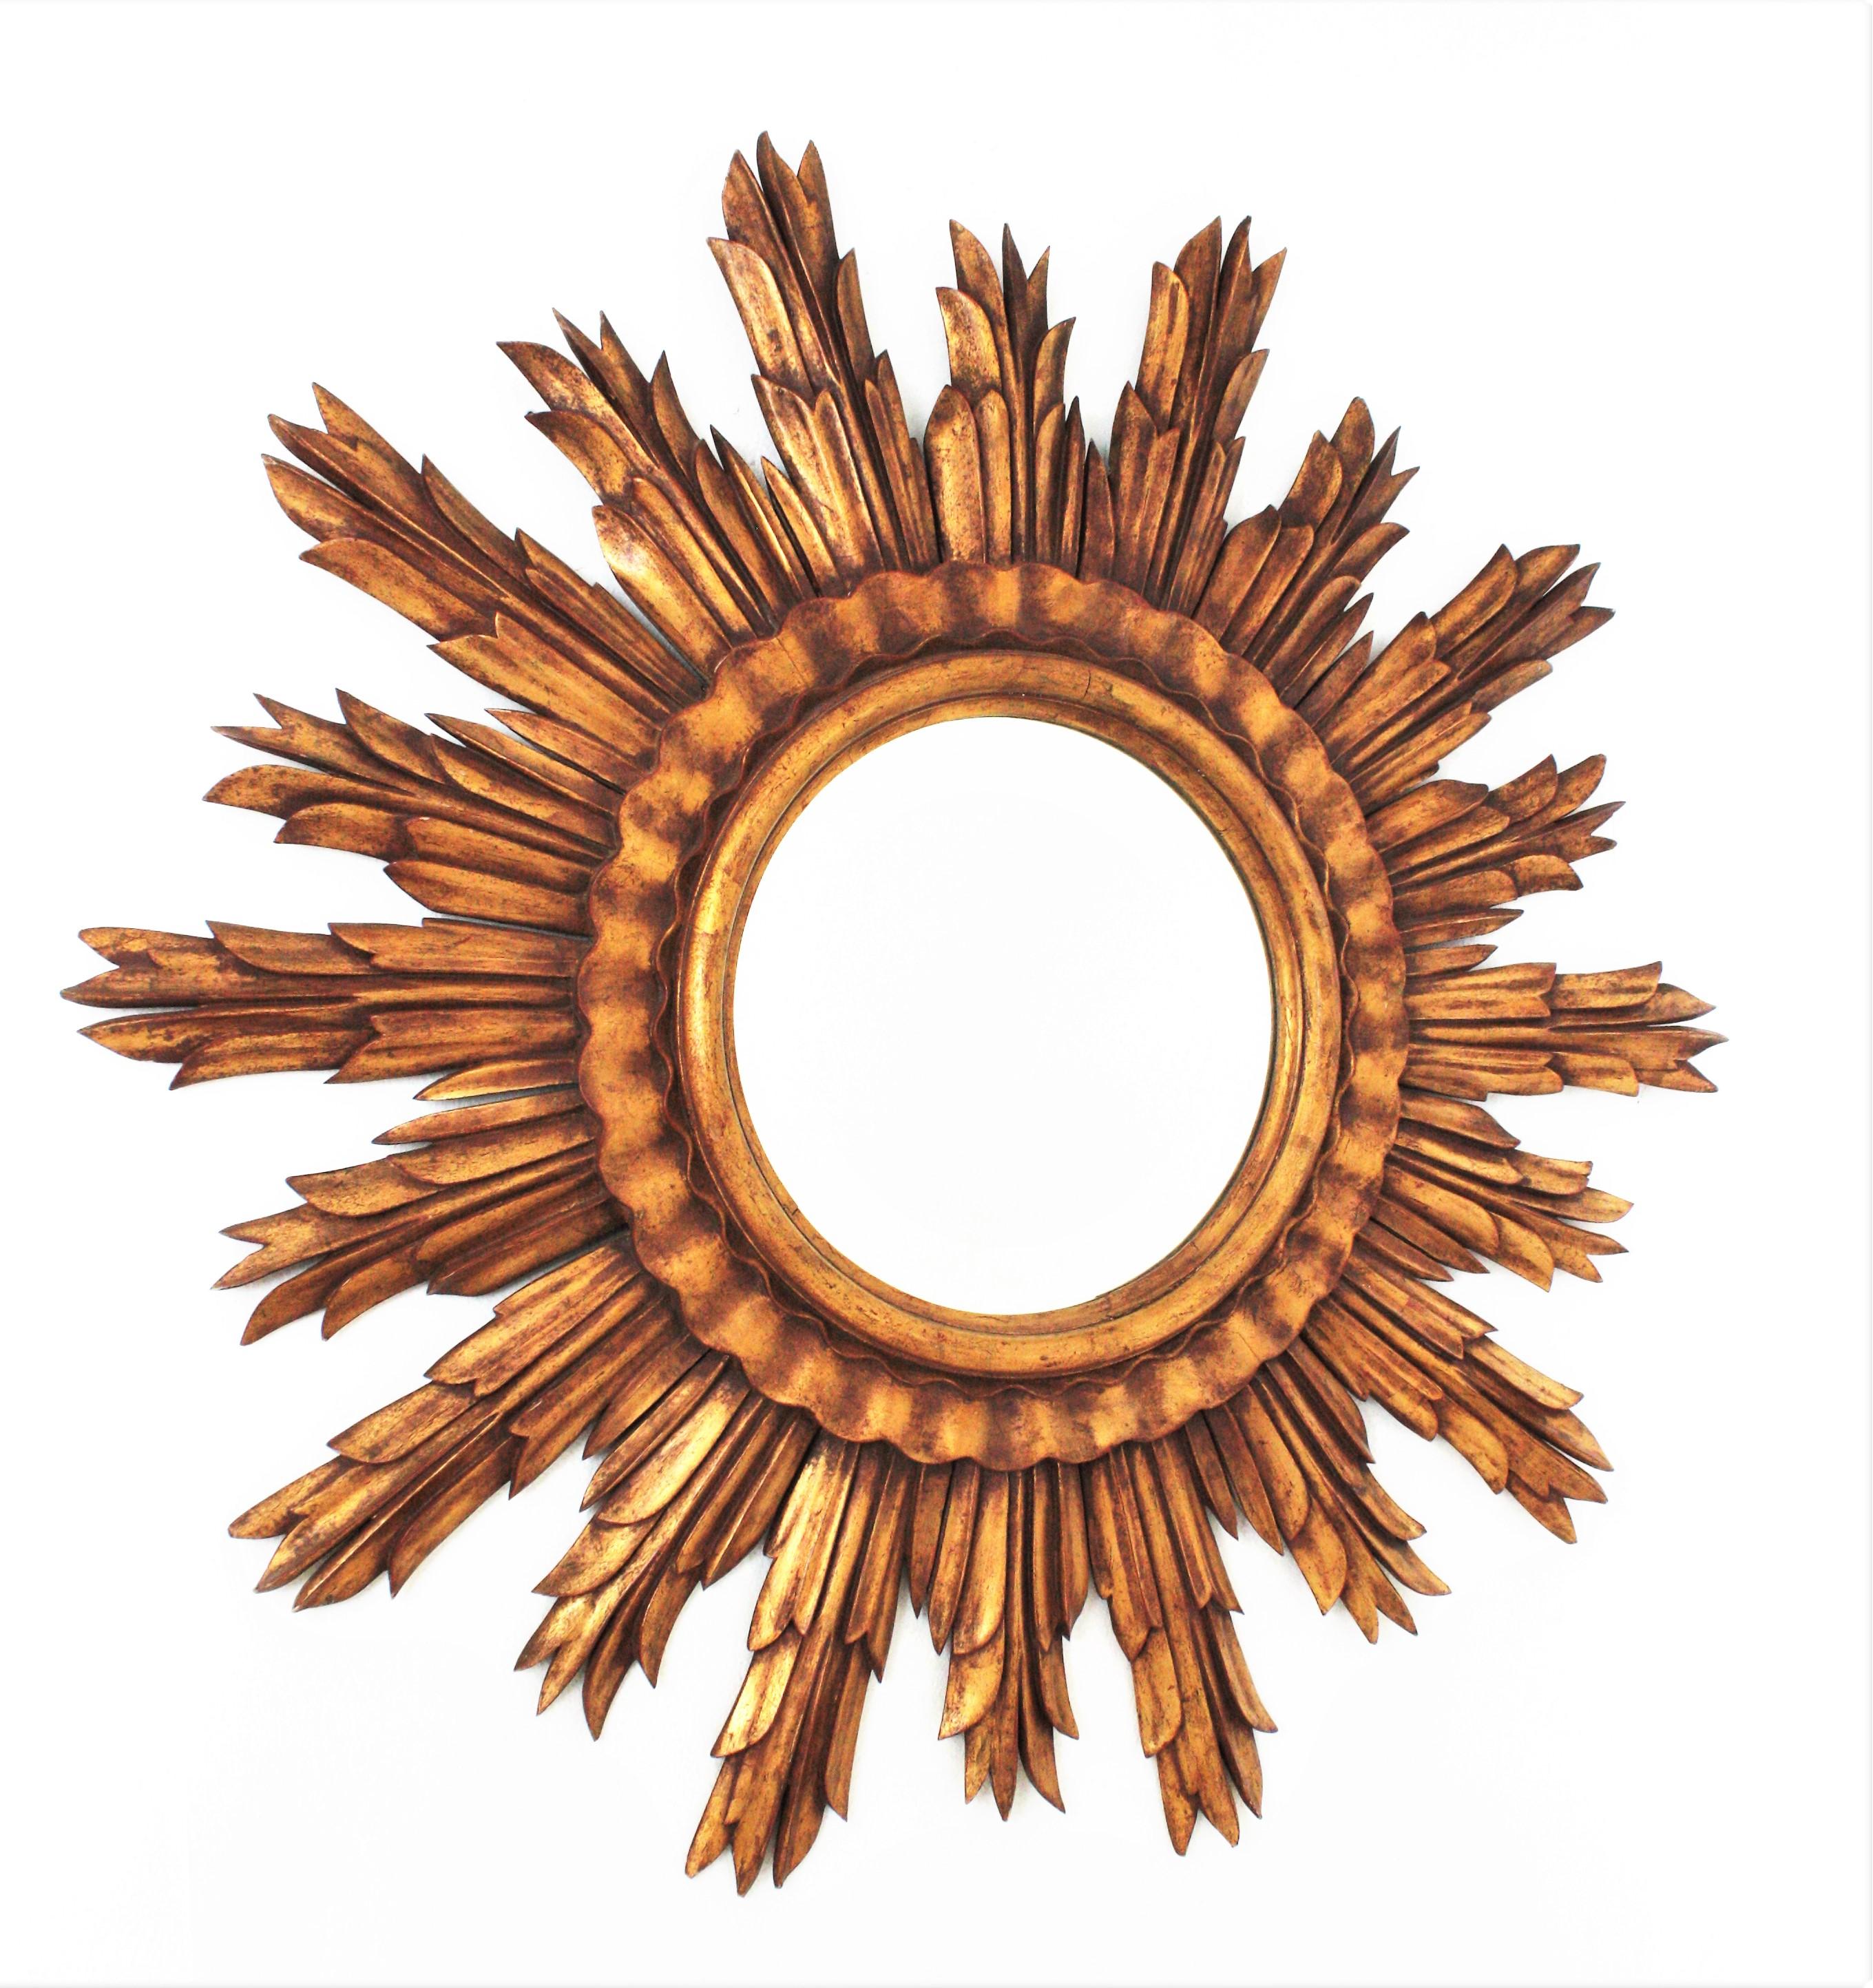 French 1950s Giltwood Sunburst Mirror, Large Scale
Unique large scale (121 cm diameter / 47,6 in diameter) Baroque style carved wood gold leaf gilt sunburst mirror.
Rare find due to its size.
This oversized sunburst mirror features a wood carved